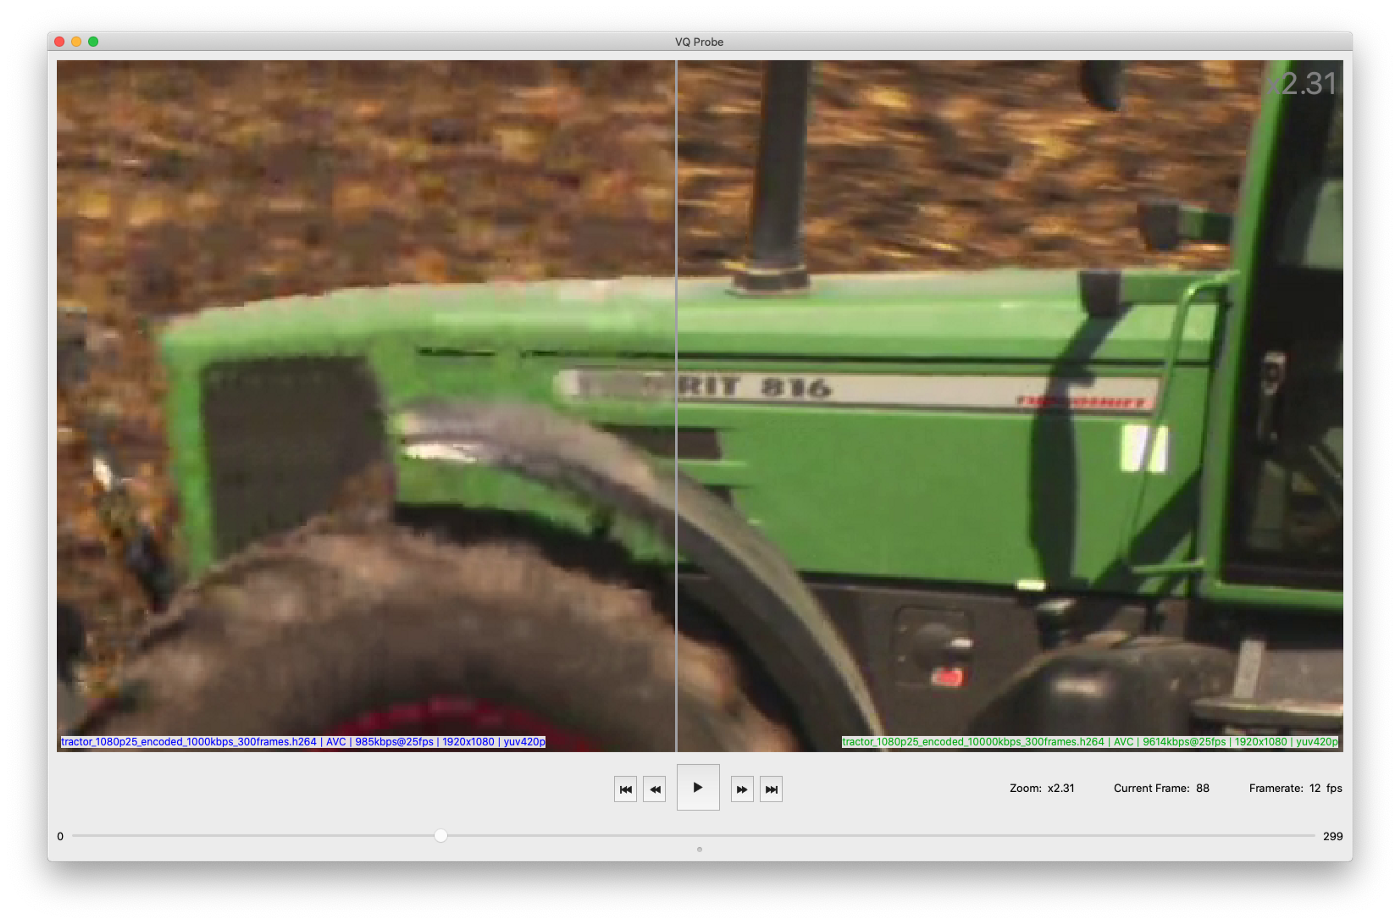 tractor_1080p25_encoded_1000kbps_300frames.h264 vs. tractor_1080p25_encoded_10000kbps_300frames.h264, frame #88